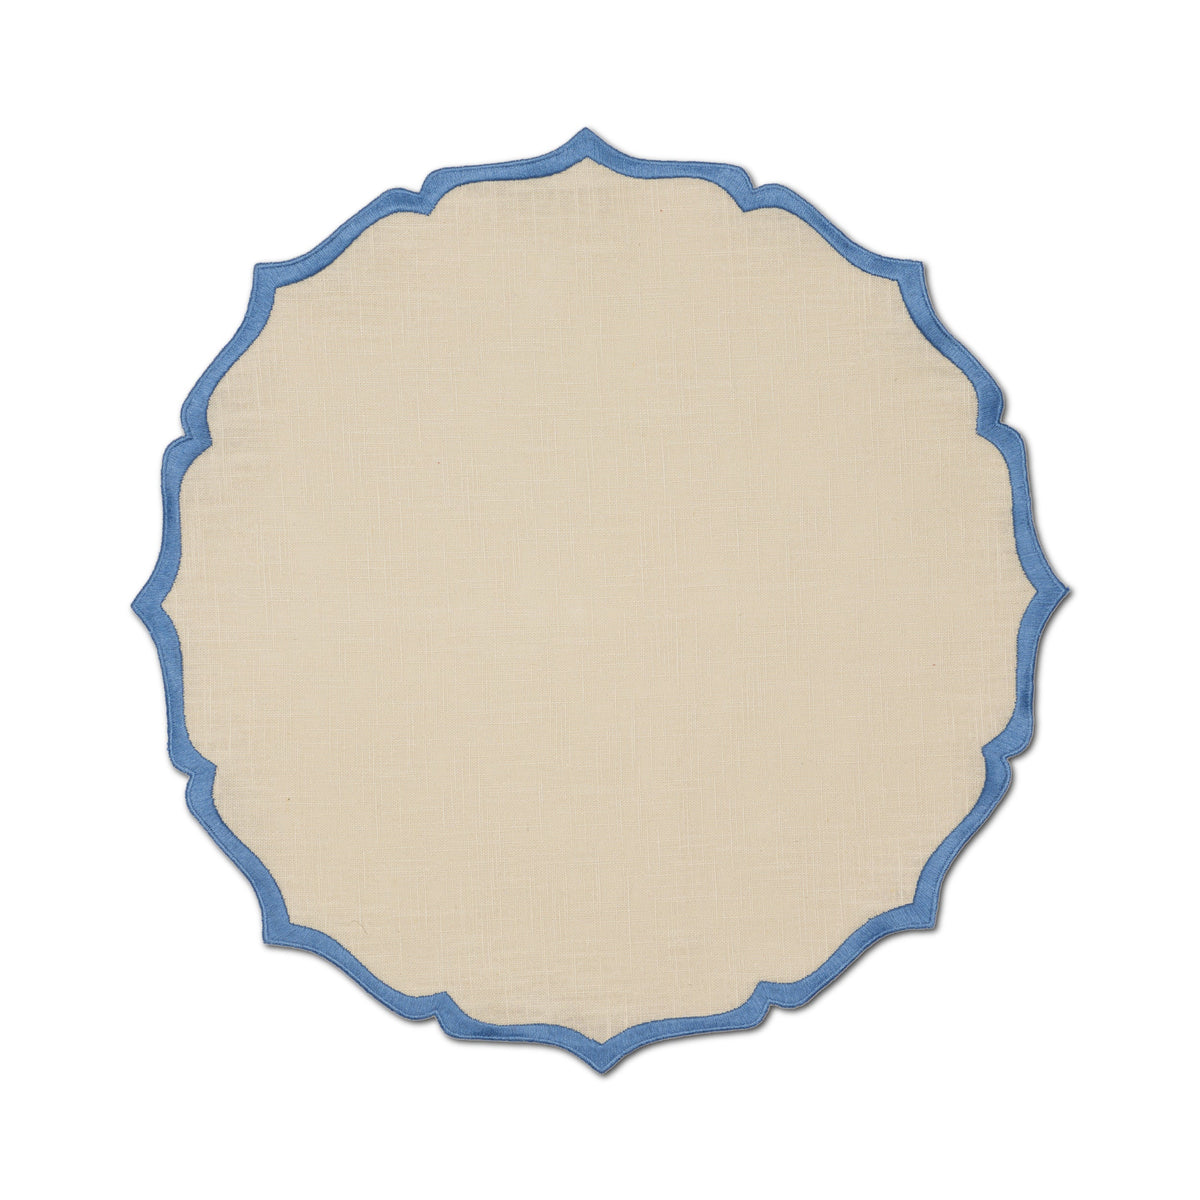 Iza Placemat in Beige Blue, Set of 4